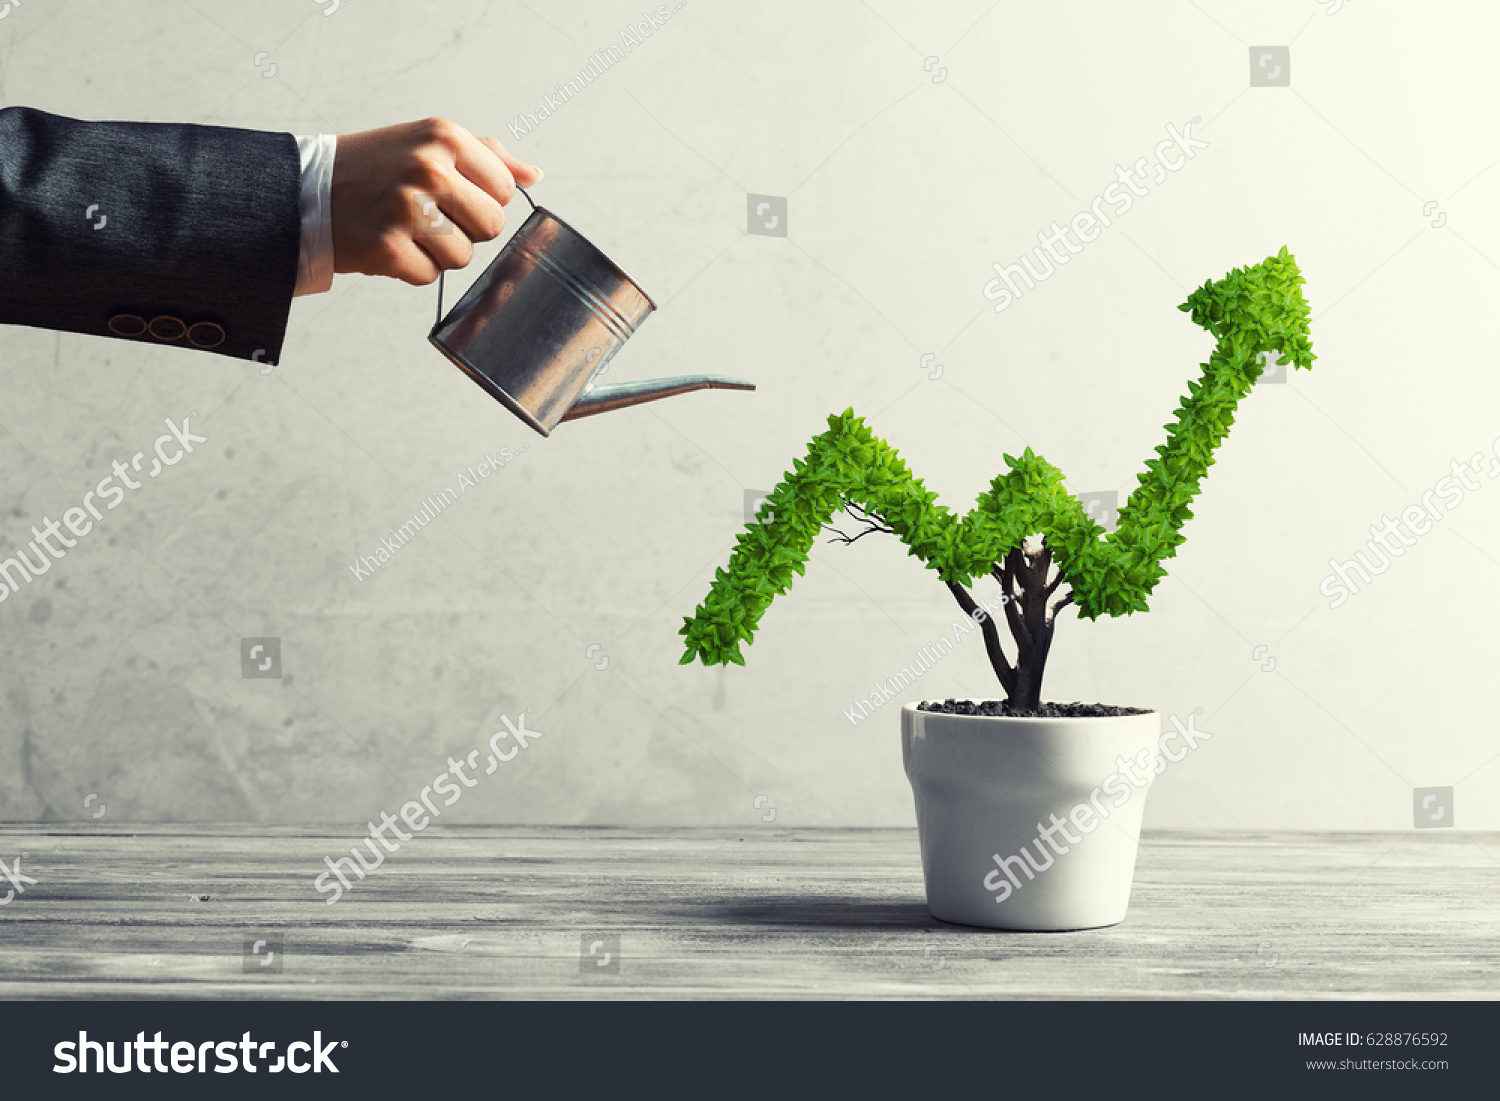 Hand of woman watering small plant in pot shaped like growing graph #628876592